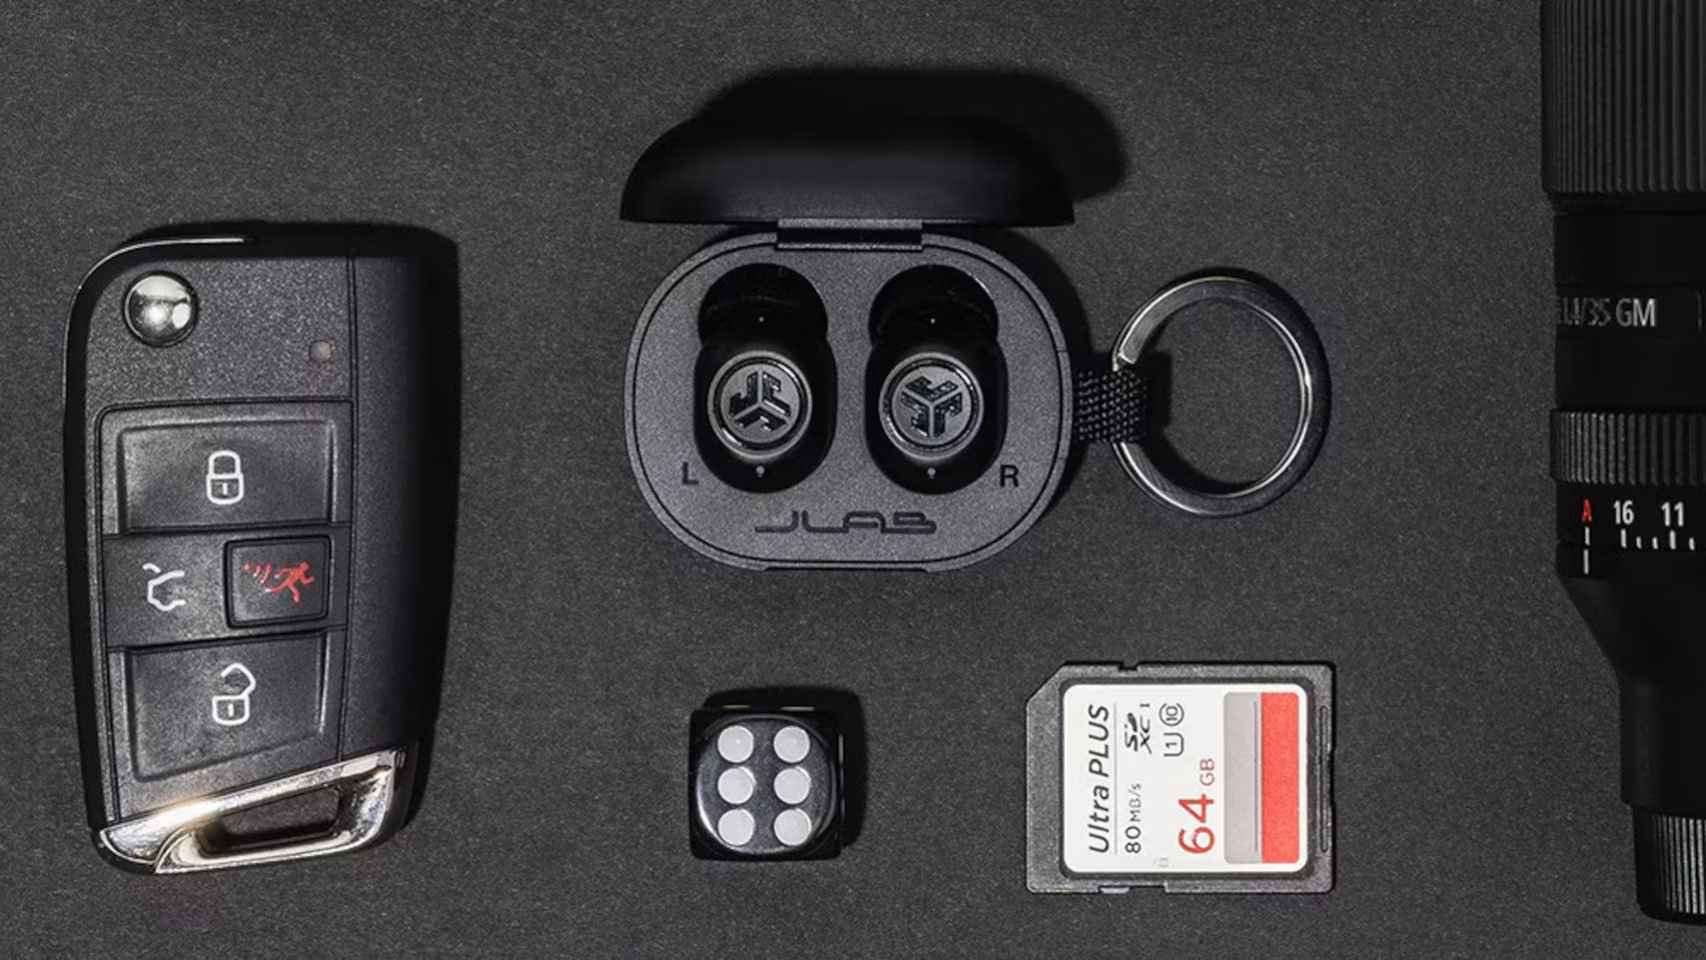 JBuds Mini are smaller than a car remote